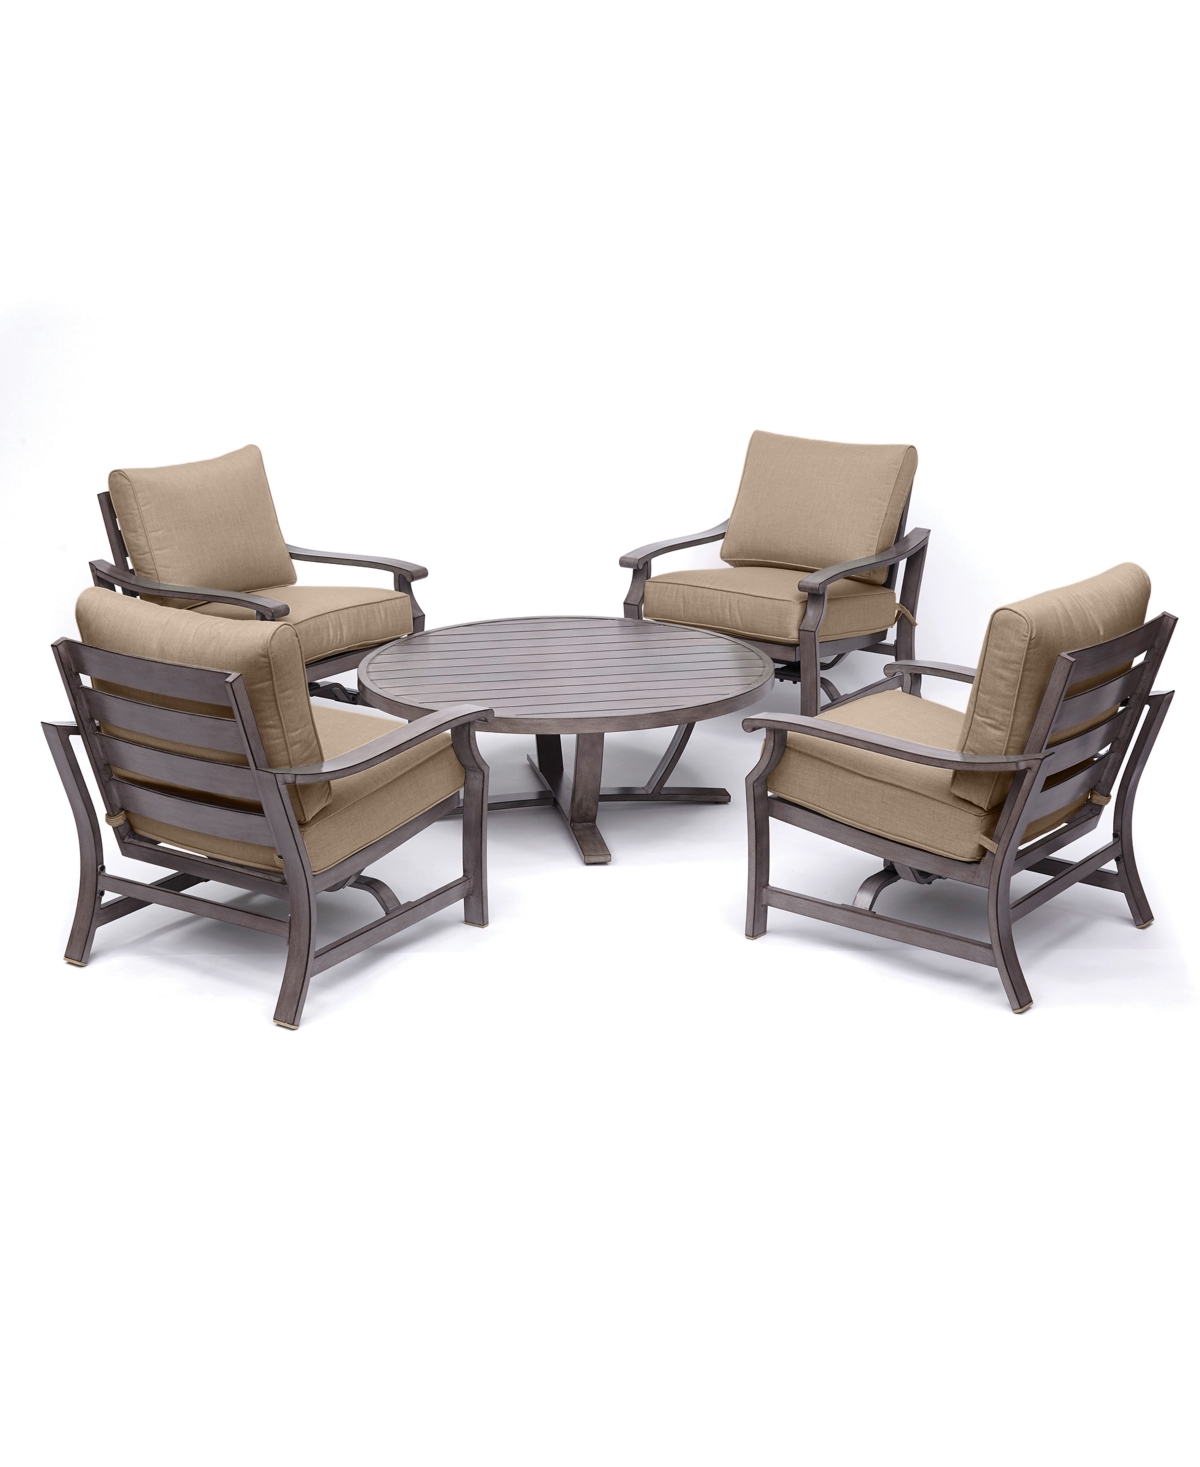 Agio Tara Aluminum Outdoor 5-pc. Seating Set (48" Round Table & 4 Rocker Chairs), Created For Macy's In Outdura Remy Pebble